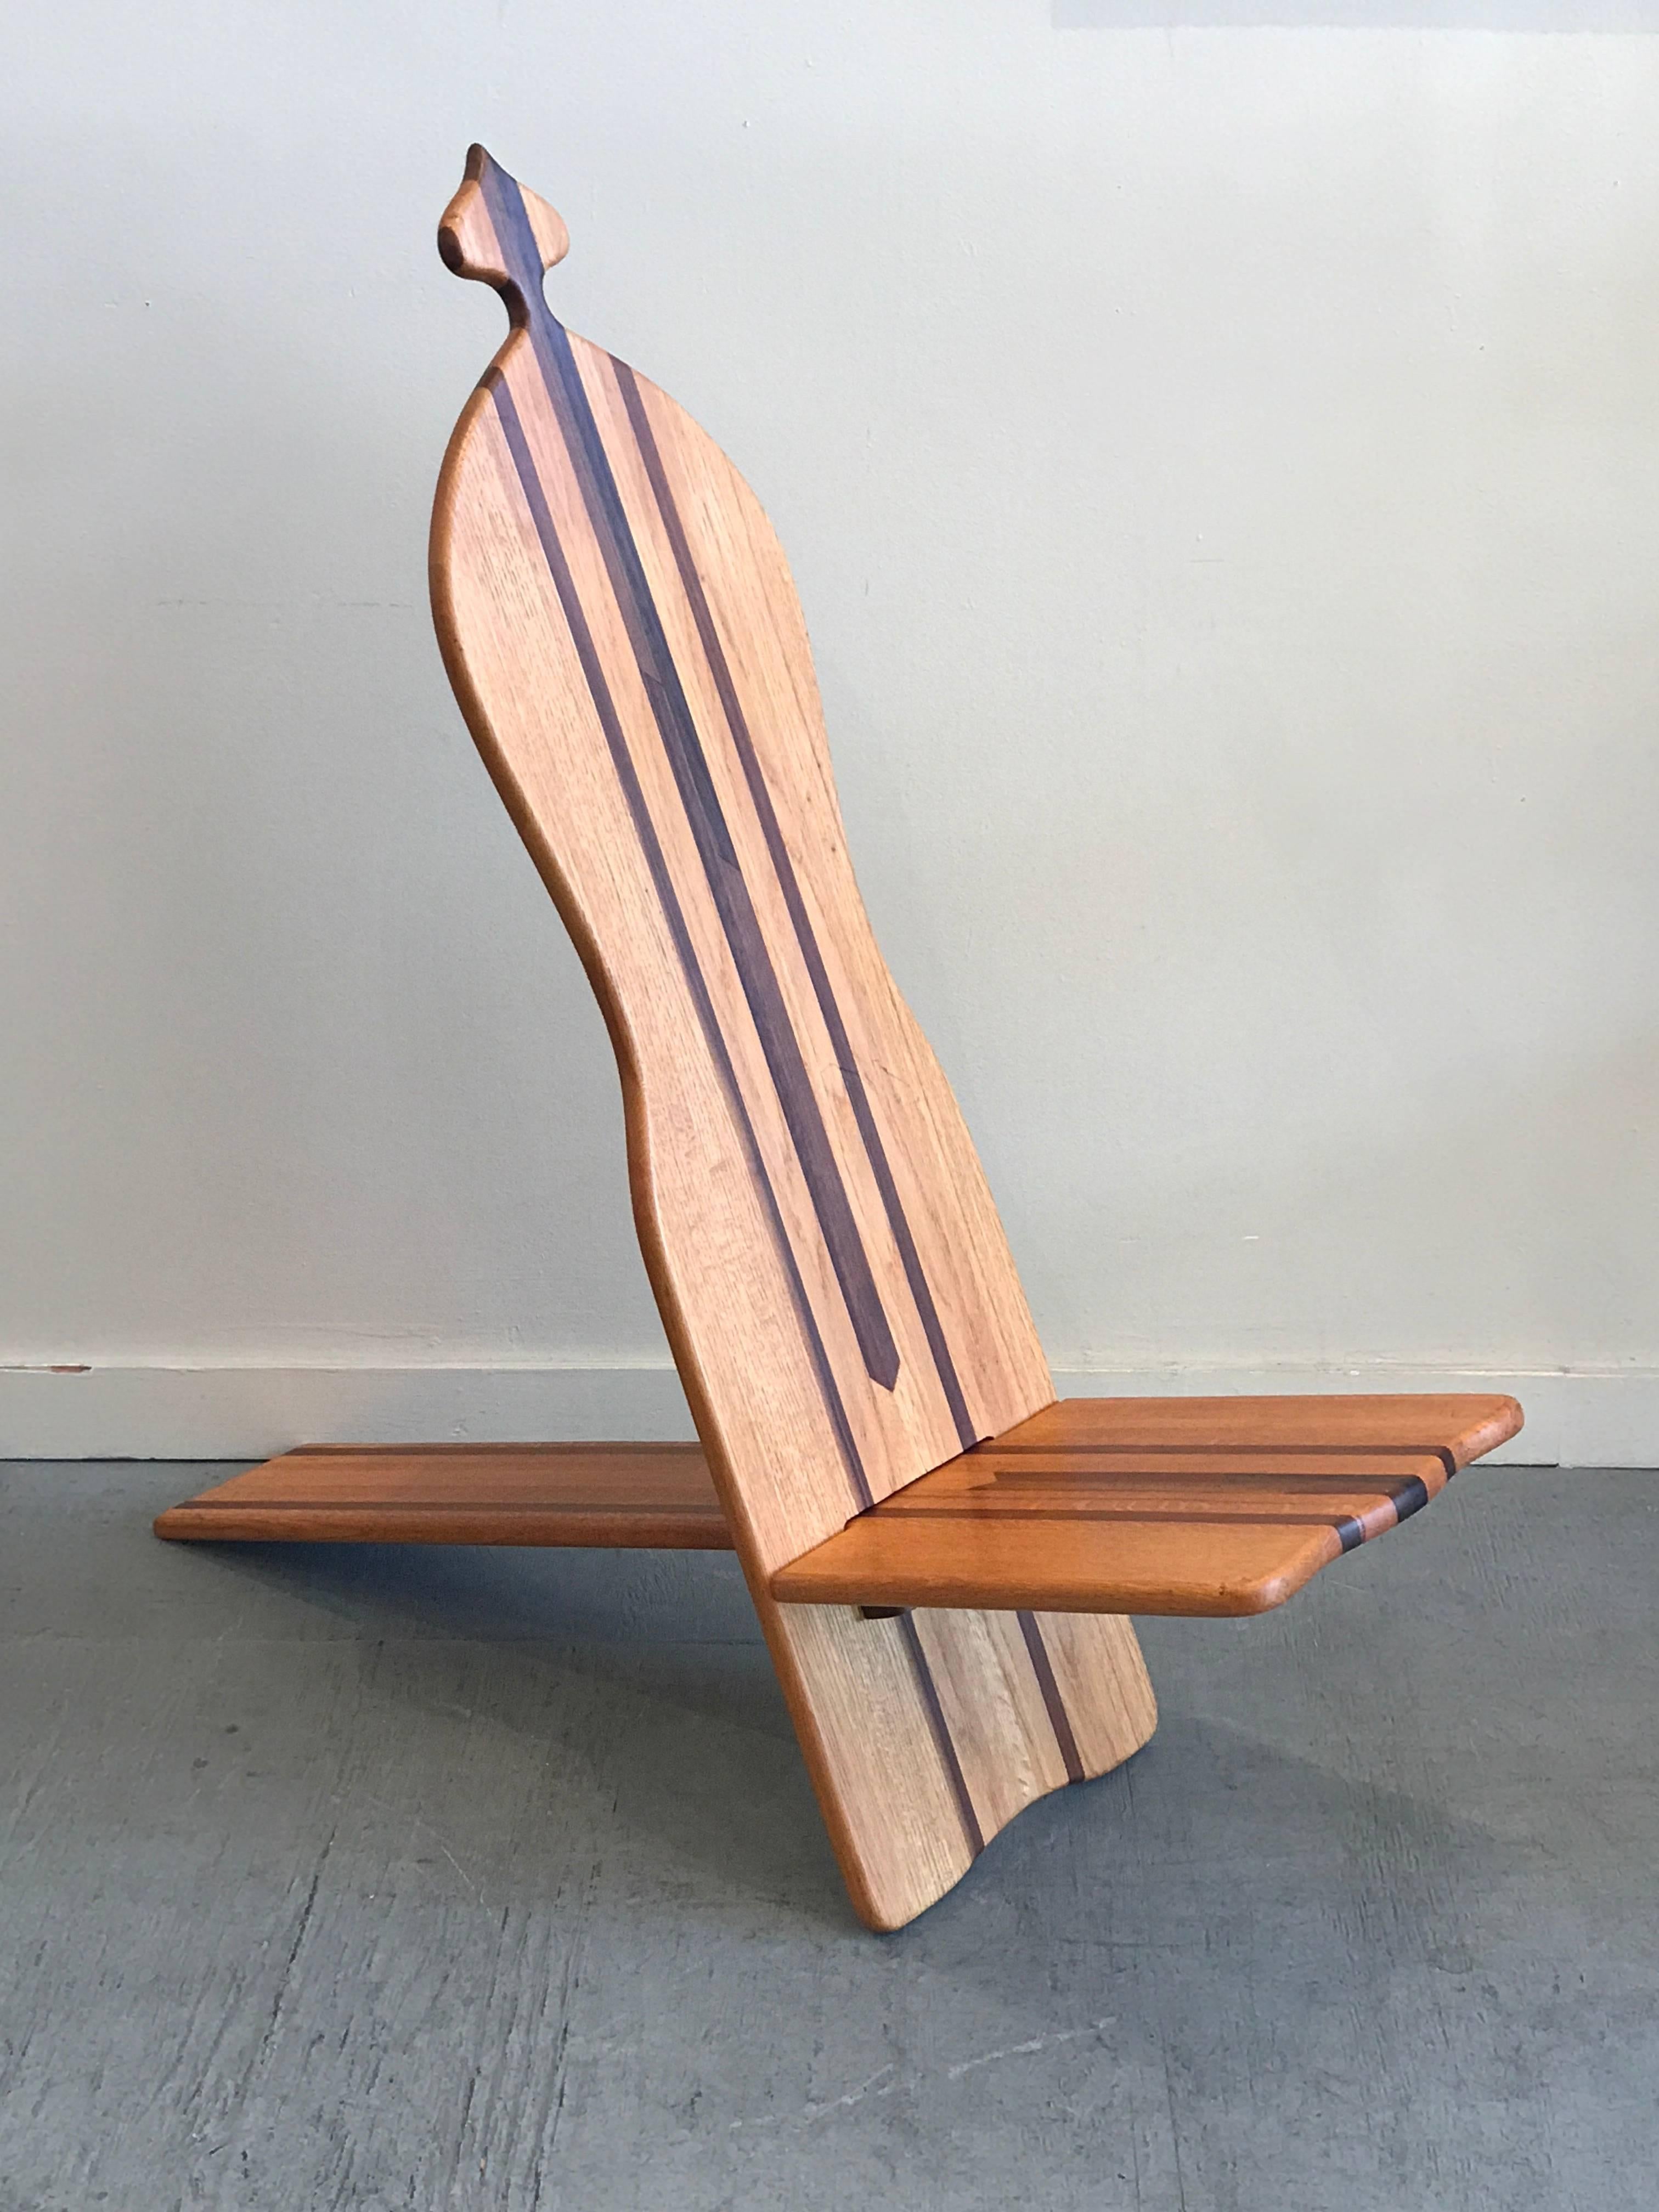 Constructed of solid oak, cherry and walnut is this studio made Baluba "Chief's" chair, designed to come apart the chair consists of two pieces that fit into one another. A 1970s take on a ancient design from Africa, the darker woods